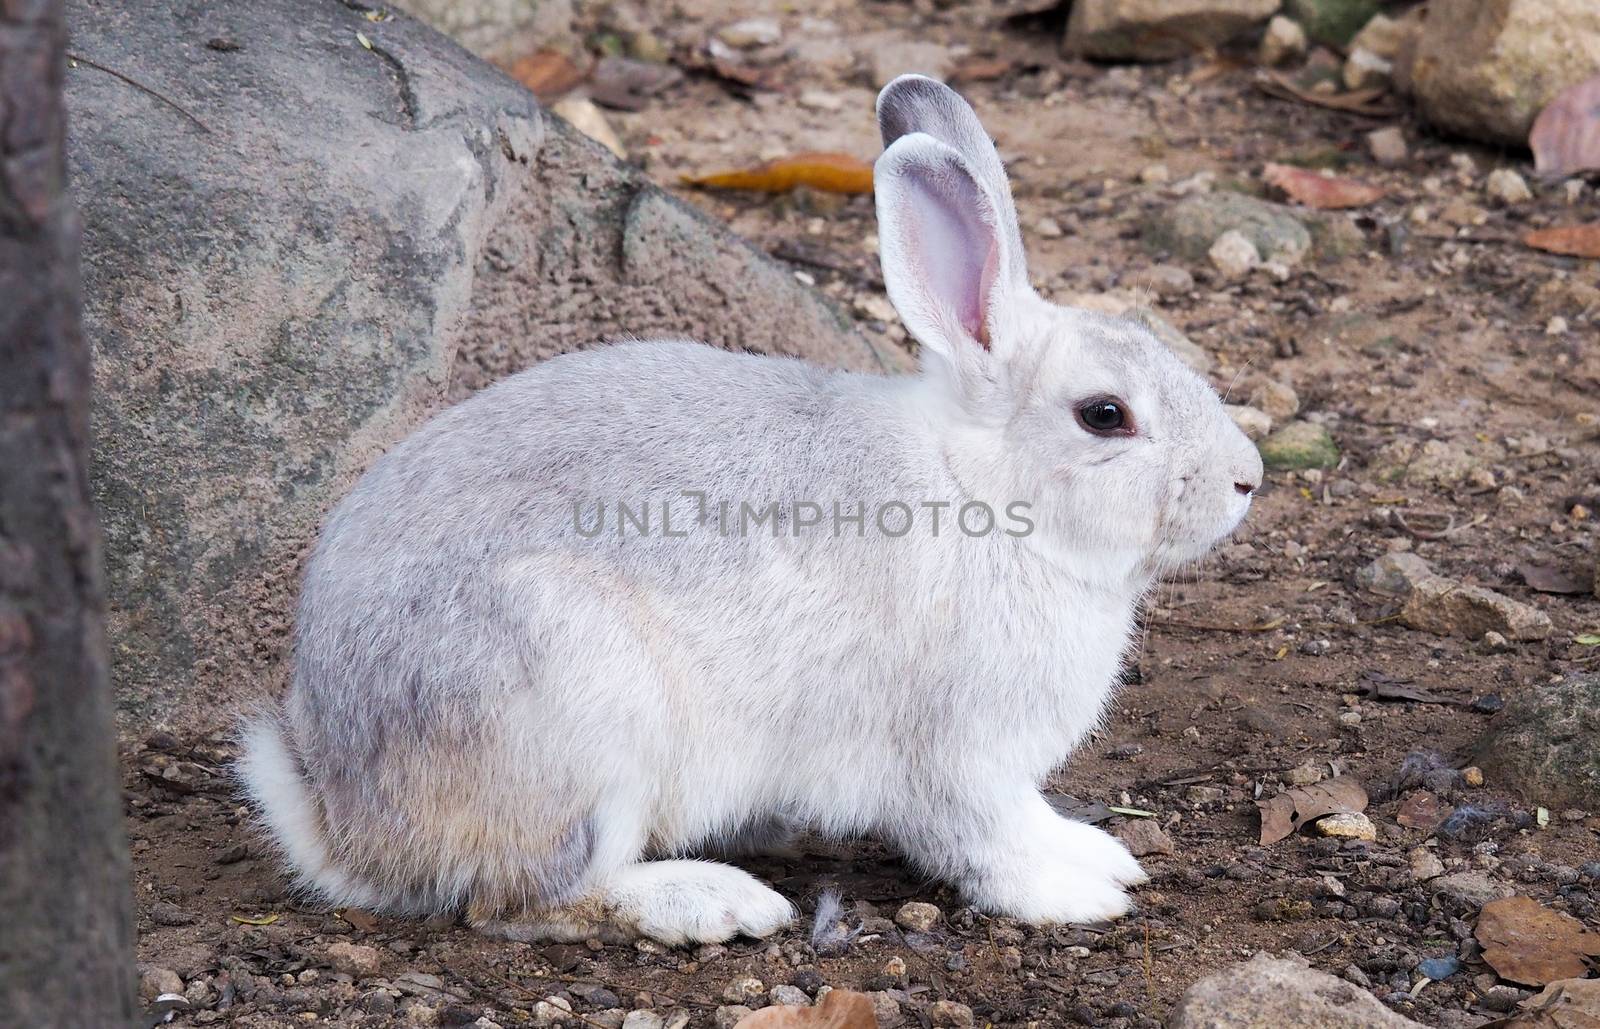 Long-eared rabbit is a skin disease. Ringworm disease from infection and inflammation, hair loss and itching, Caring for sick rabbits.